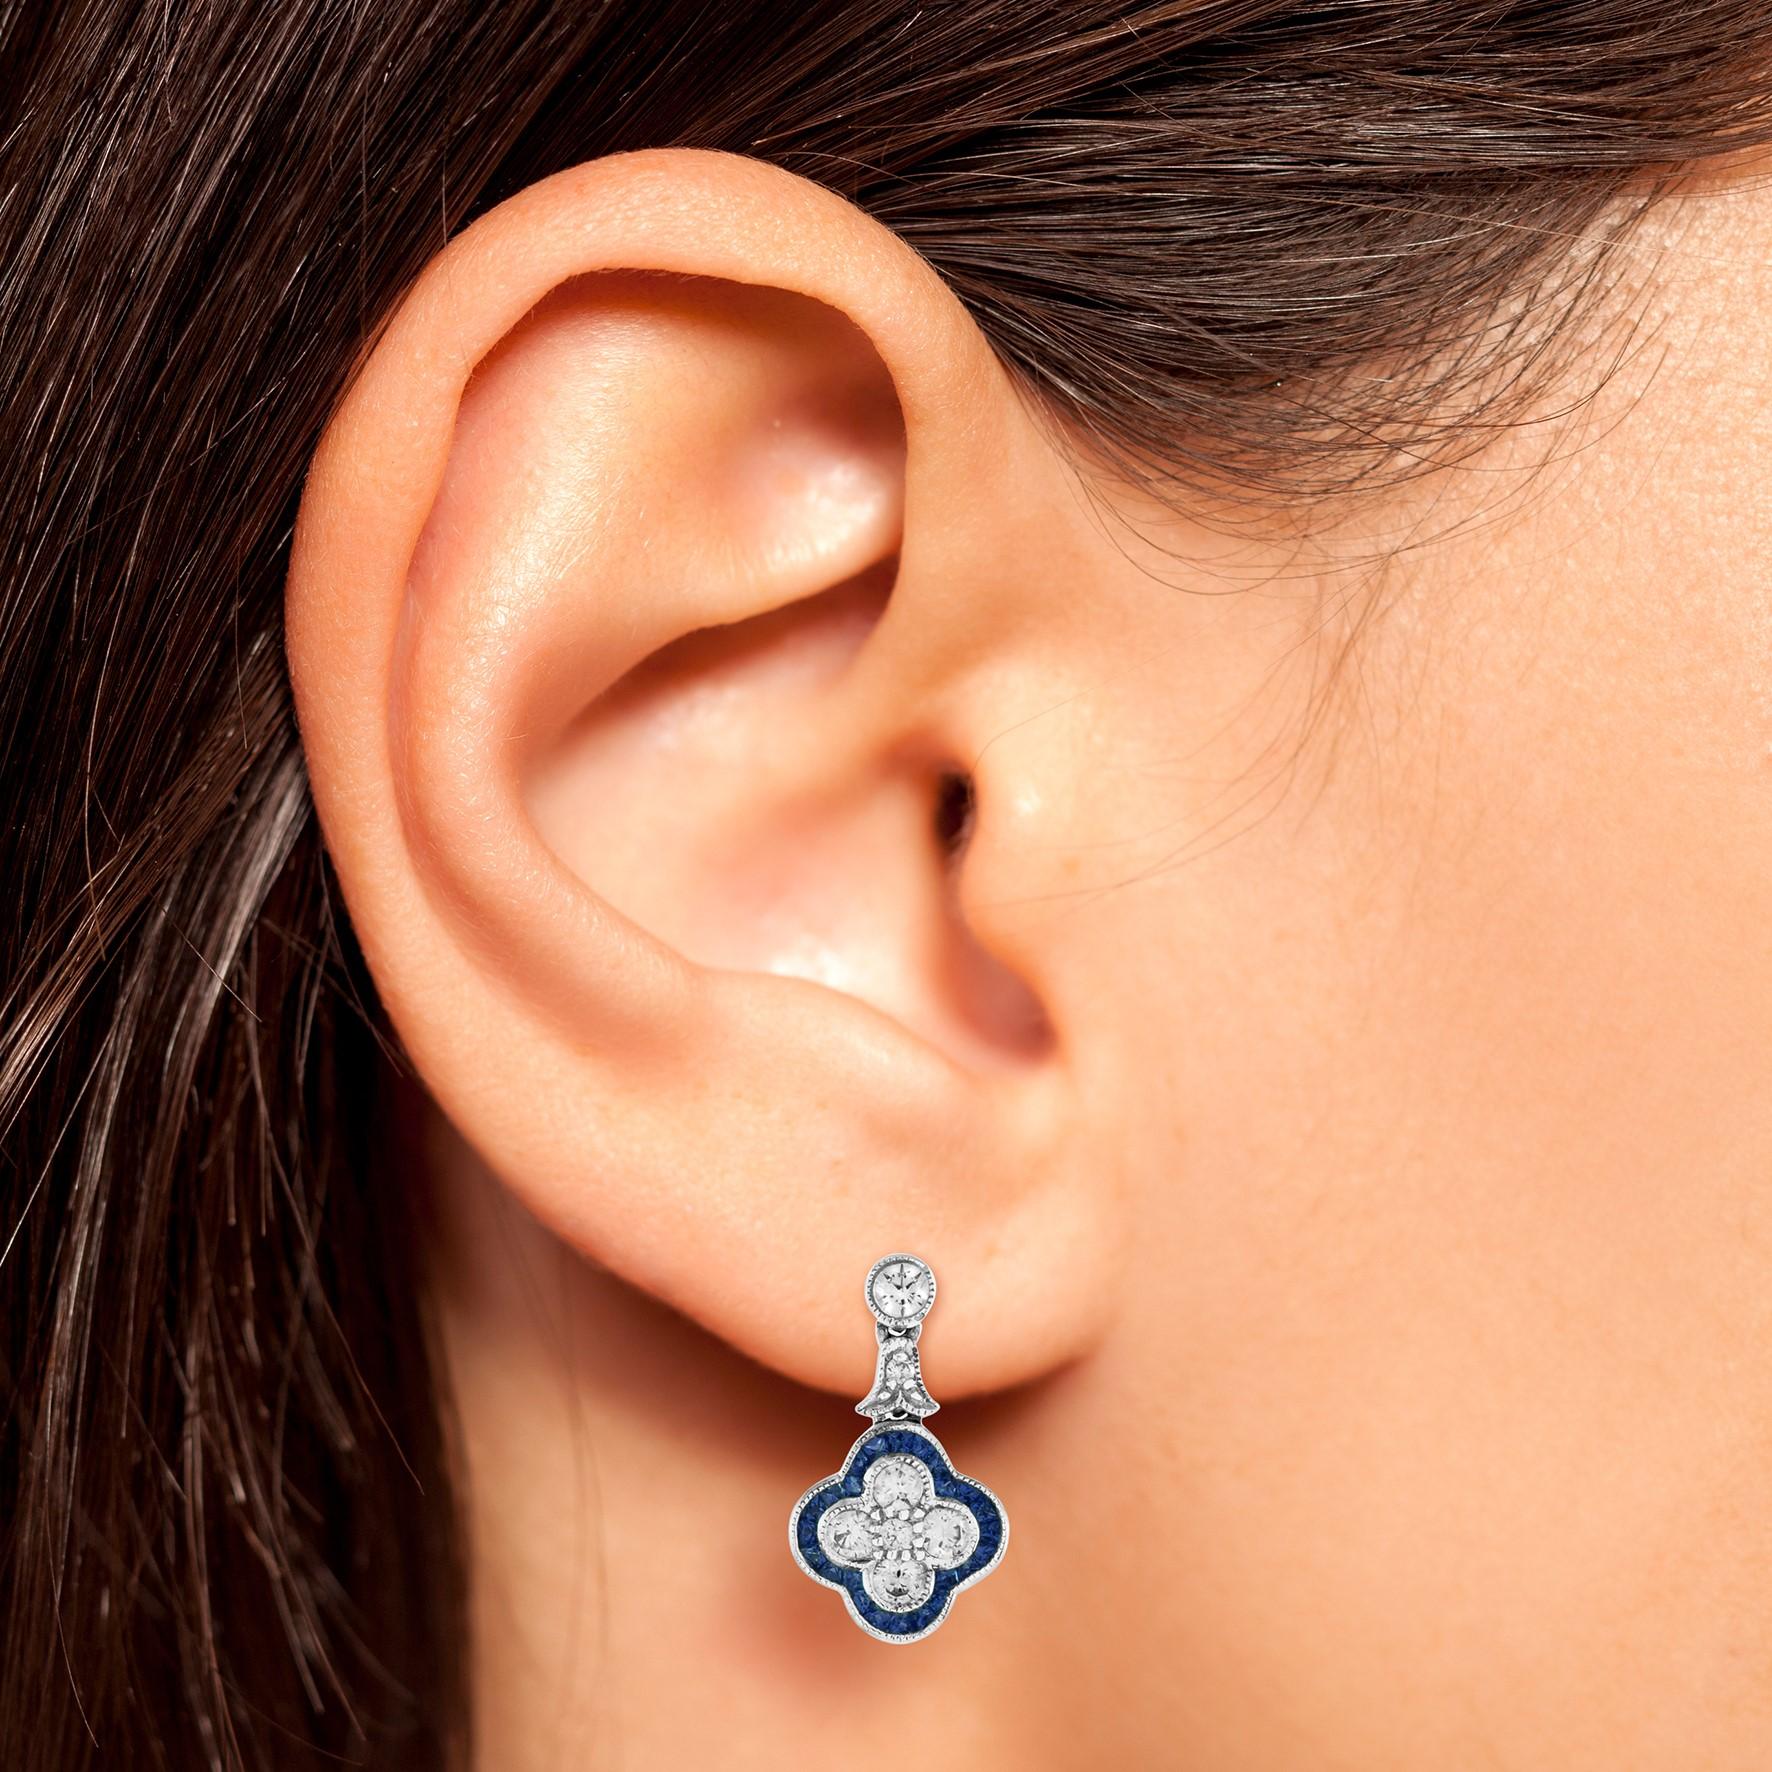 This a lovely pair of earrings for anyone who loves antique-inspired jewelry. Made of dazzling round cut diamond and French cut sapphire set on 18k white gold. A total of fourteen diamonds form a flower with a sapphire trim design for a beautifully